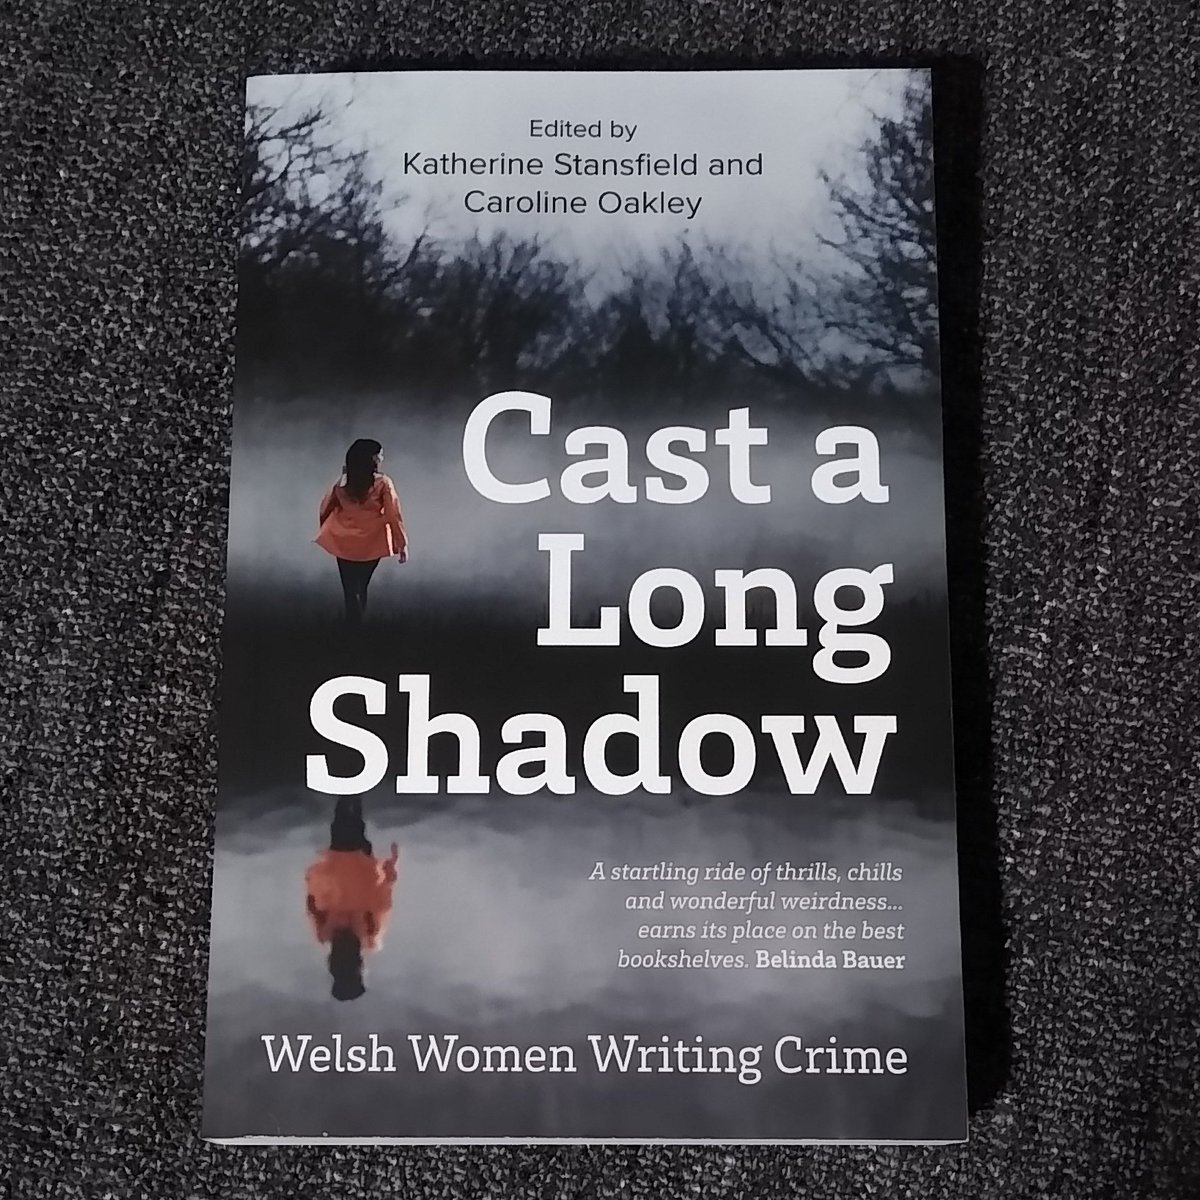 Went to an excellent Crime Writing Workshop run by poet & author @K_Stansfield & @GriffinBooksUK earlier today as part of #IBW22 and #Penarth Lit Fest. Thank you both!  

Now to read some Welsh Women Writing Crime from @honno 🏴󠁧󠁢󠁷󠁬󠁳󠁿🔪